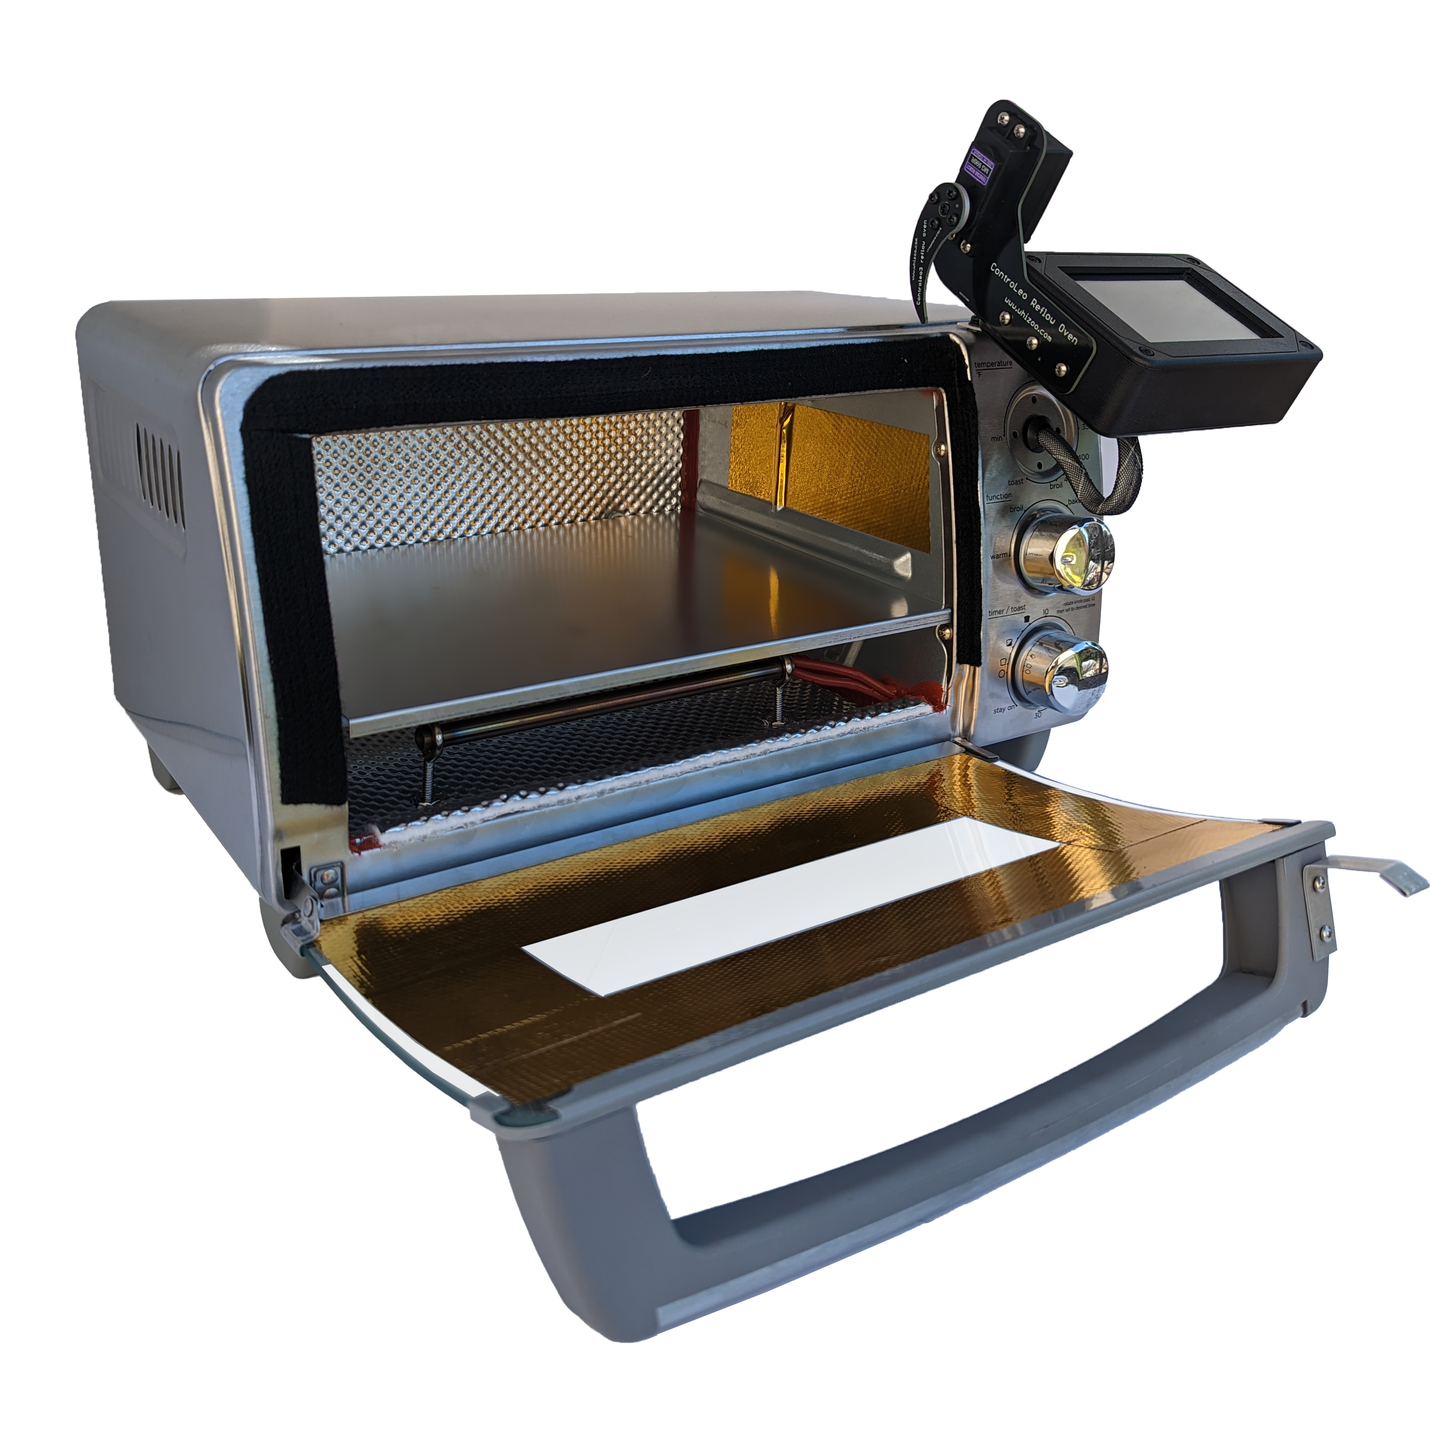 Ready-to-Run Reflow Oven